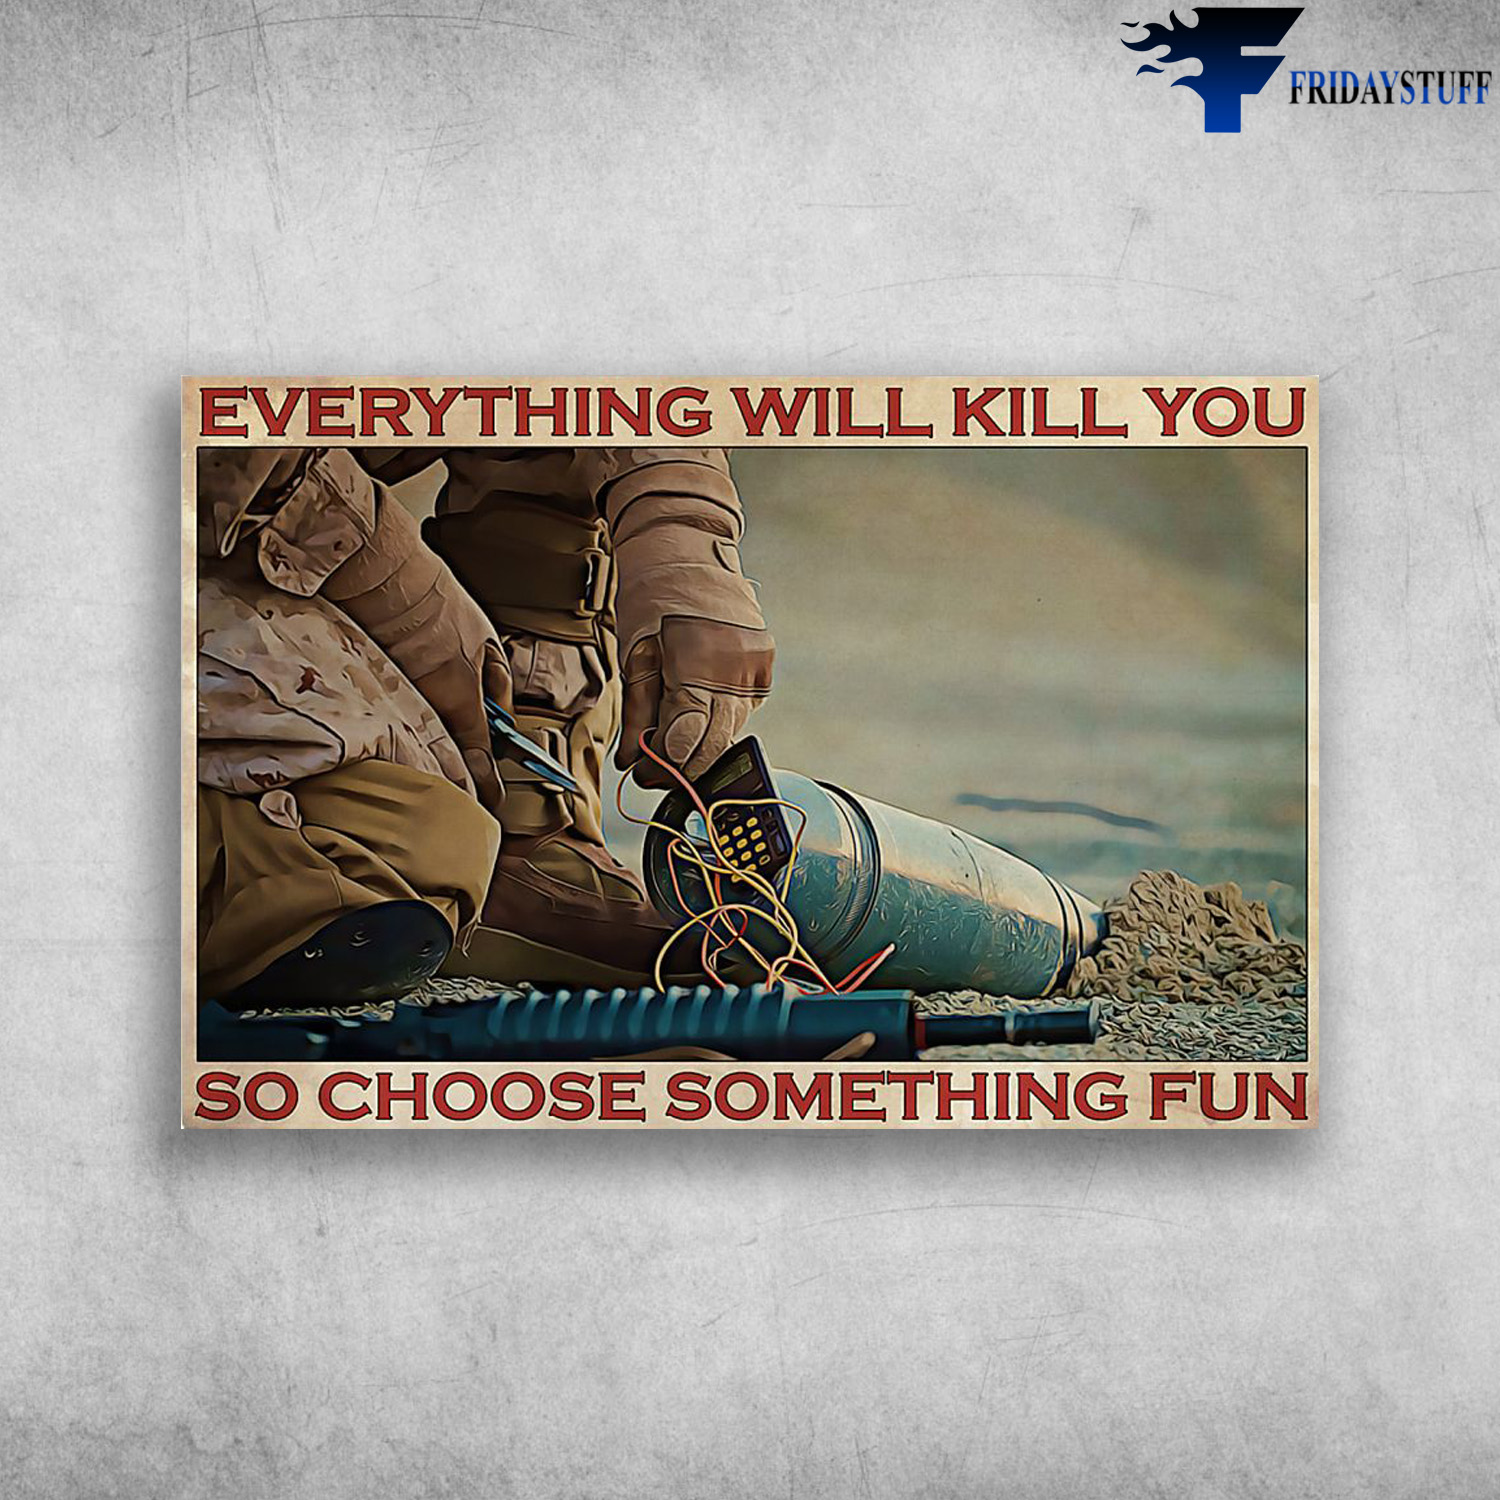 Man Is Defusing The Bomb - Everything Will Kill You So Choose Something Fun